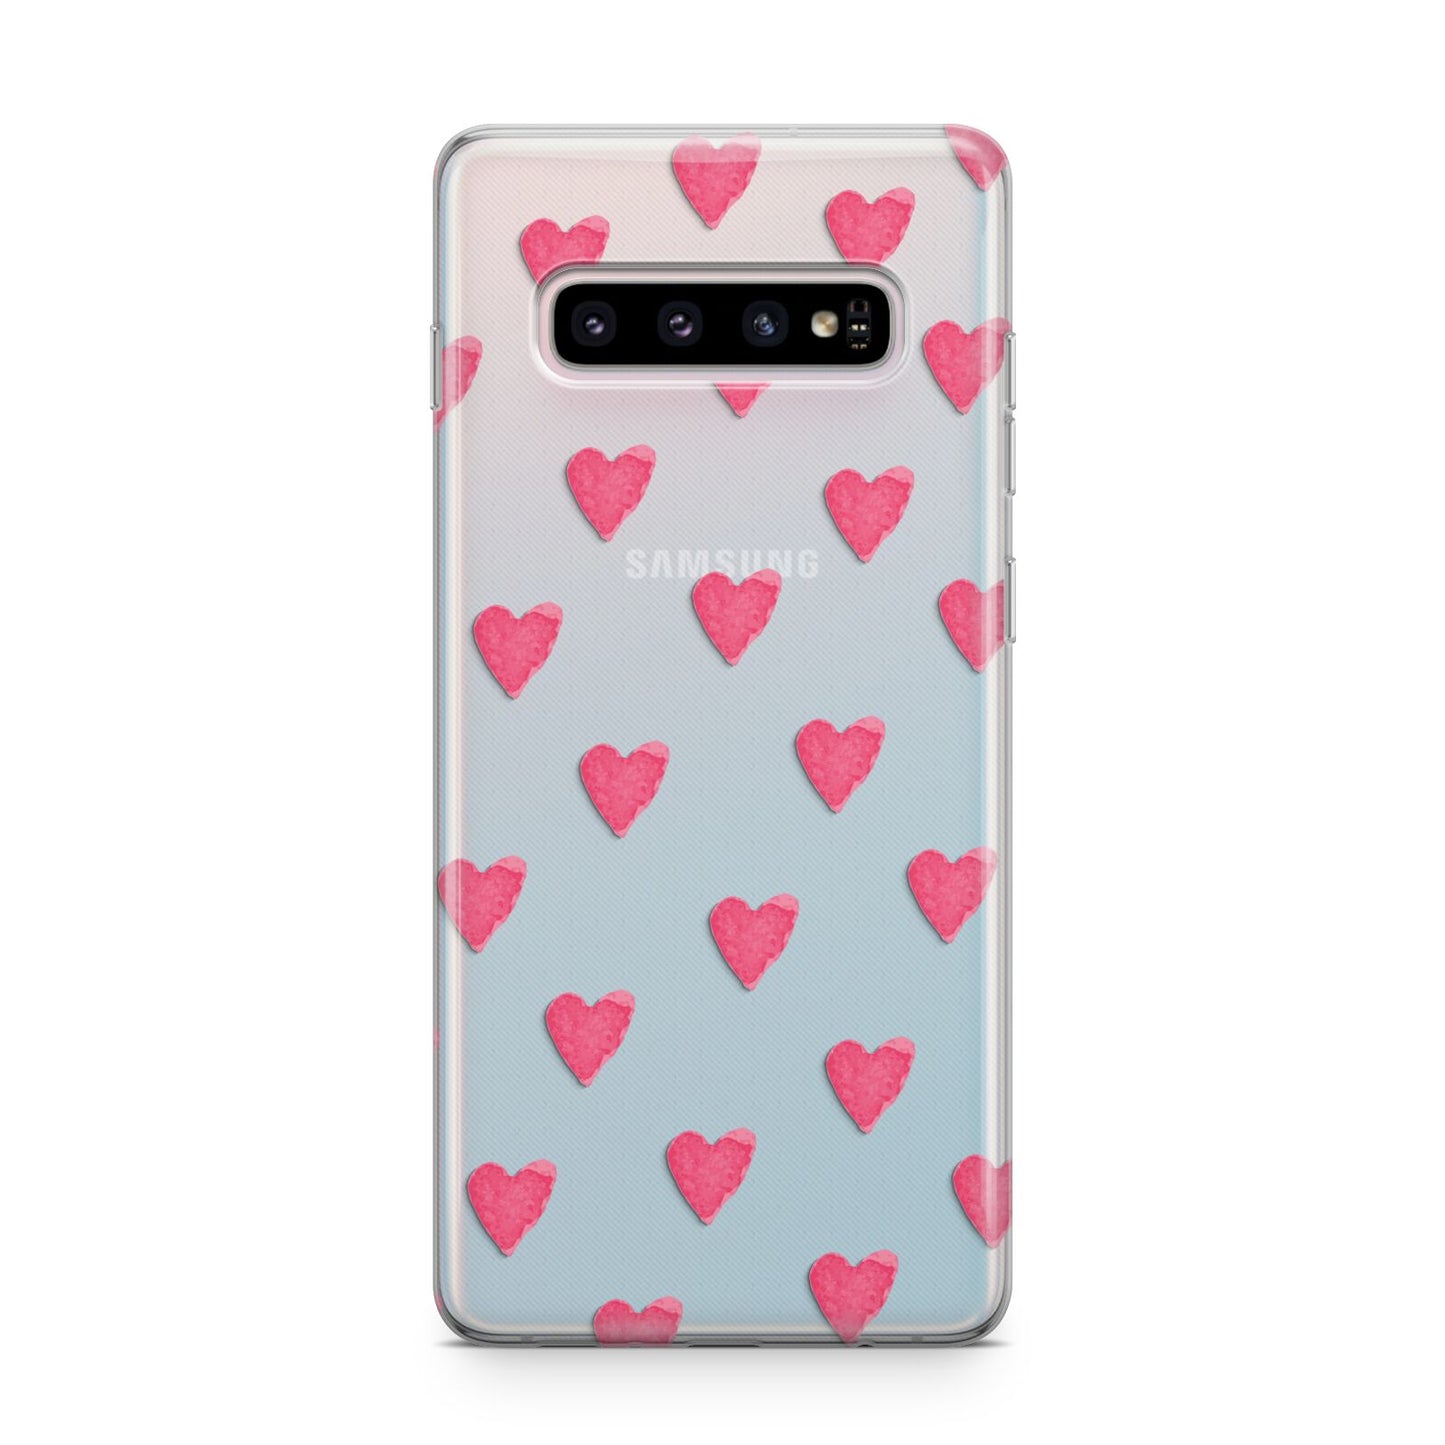 Heart Patterned Samsung Galaxy S10 Plus Case